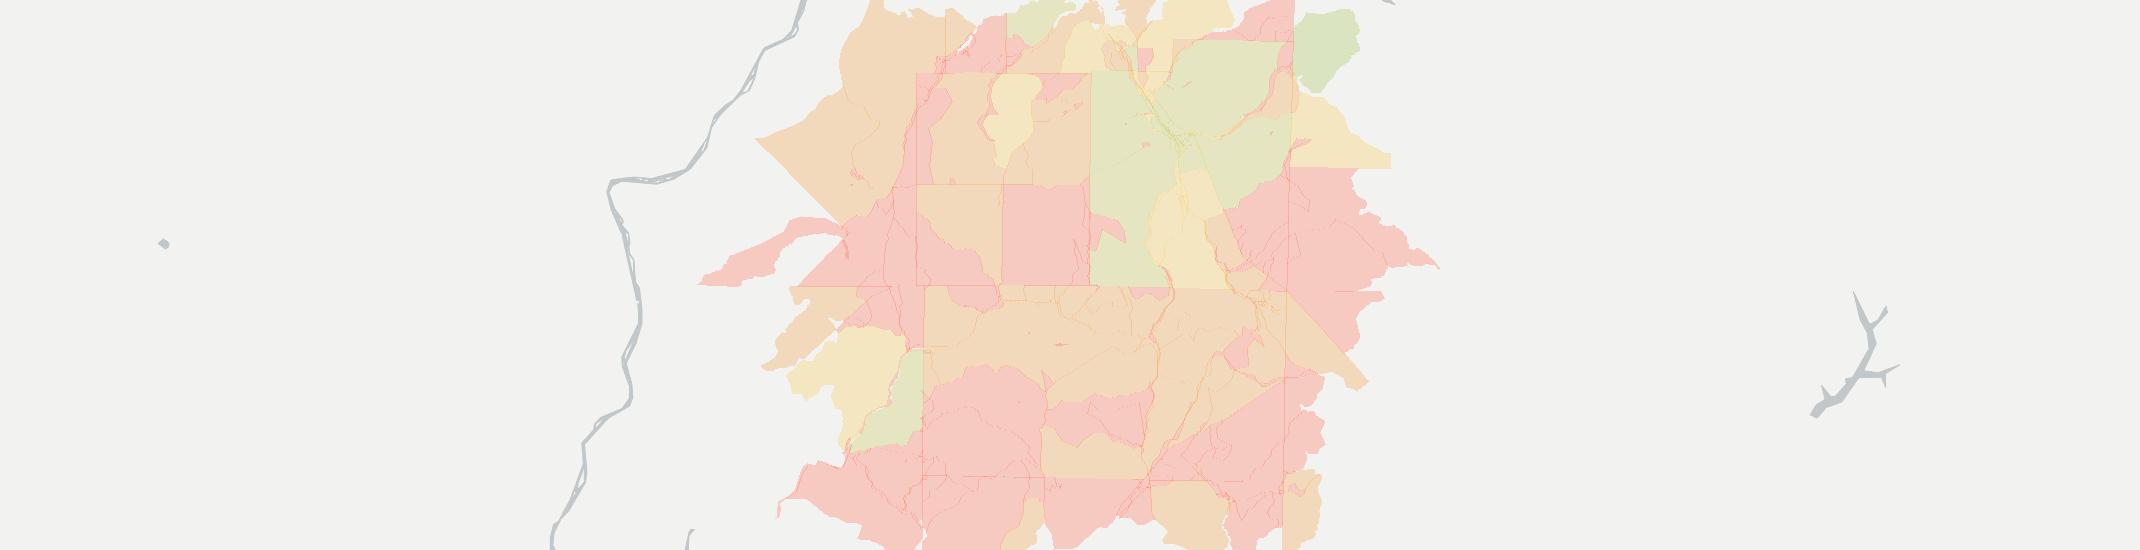 Sheffield Internet Competition Map. Click for interactive map.